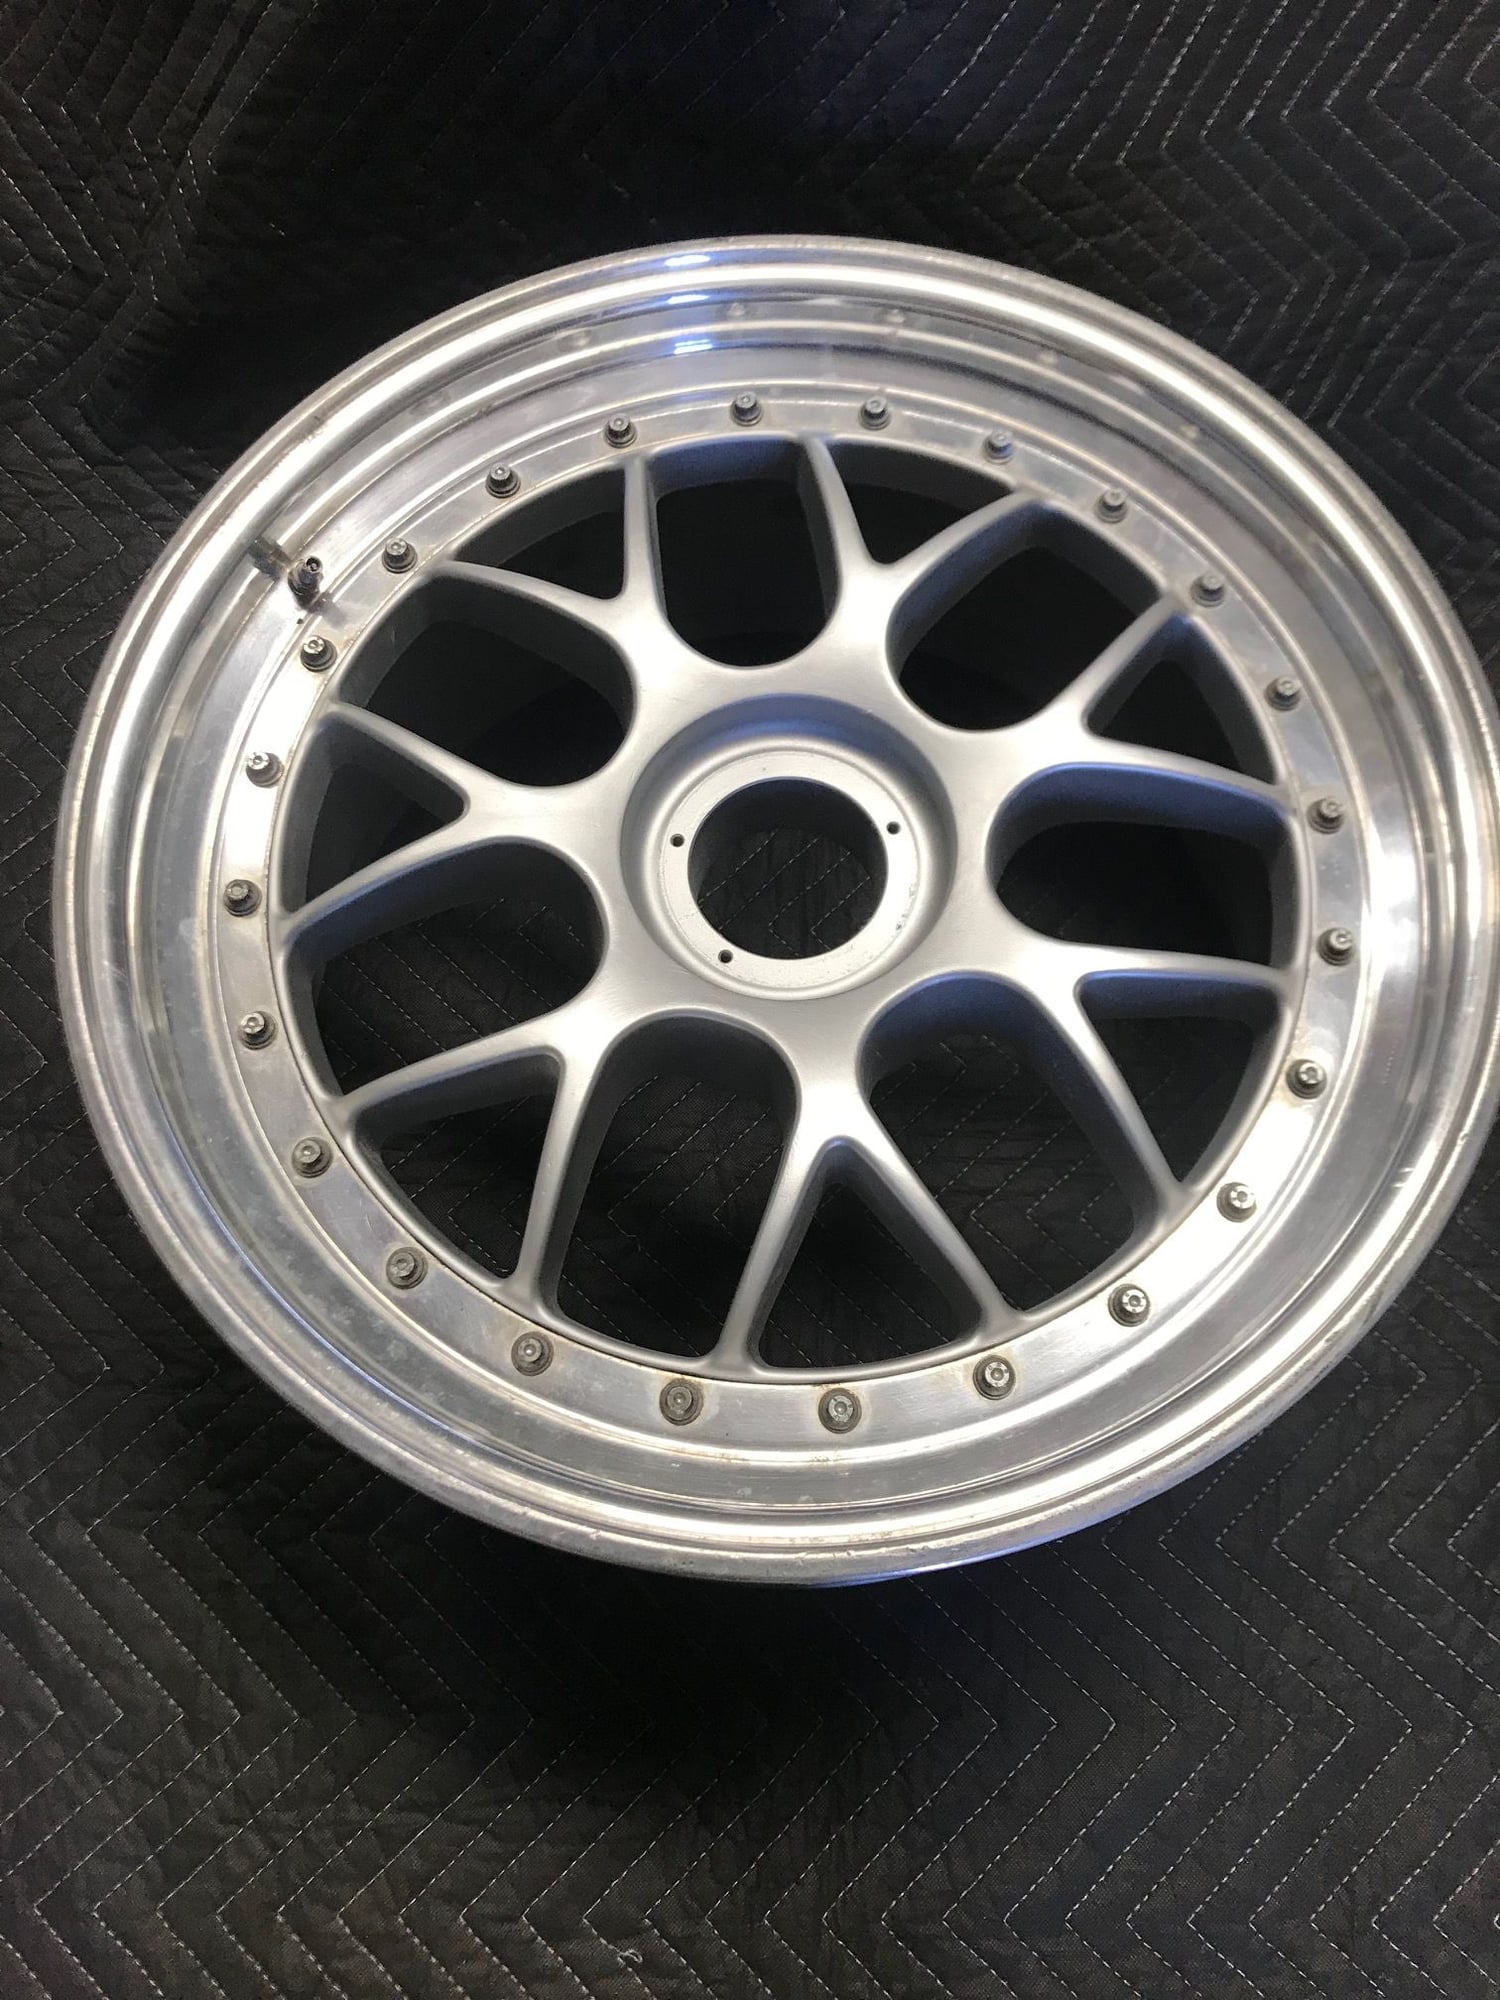 Wheels and Tires/Axles - 997.2 cup car wheels - Used - 2011 to 2012 Porsche 911 - Great Falls, VA 22066, United States